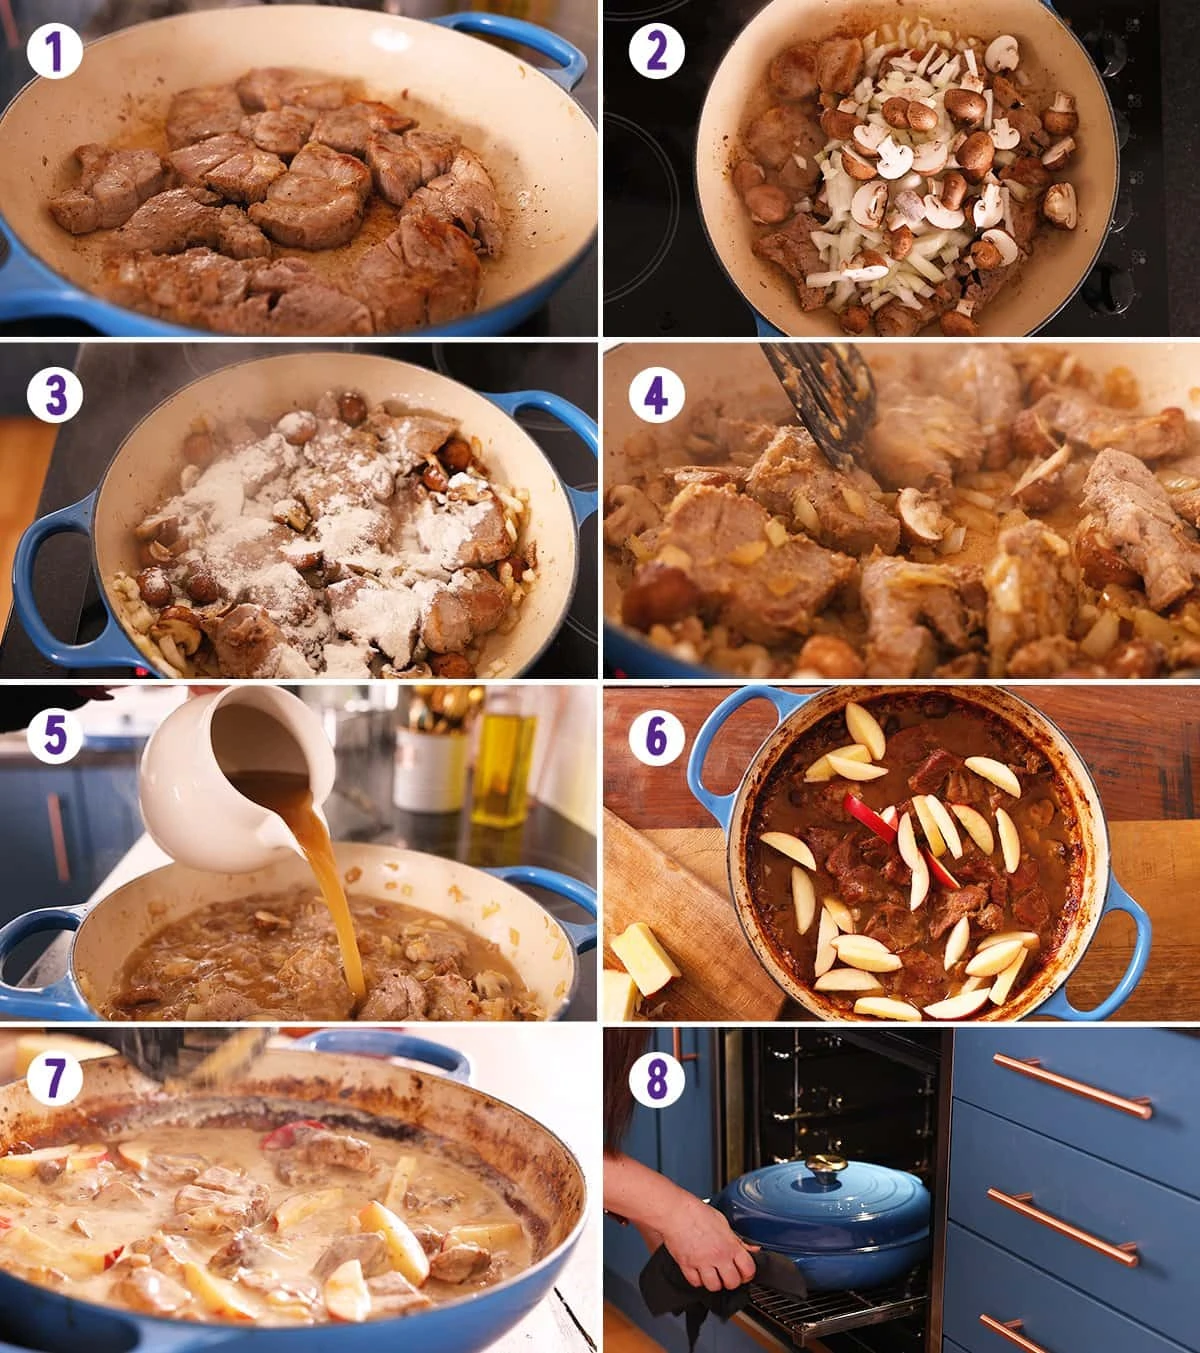 8 image collage showing how to make creamy pork and apple casserole